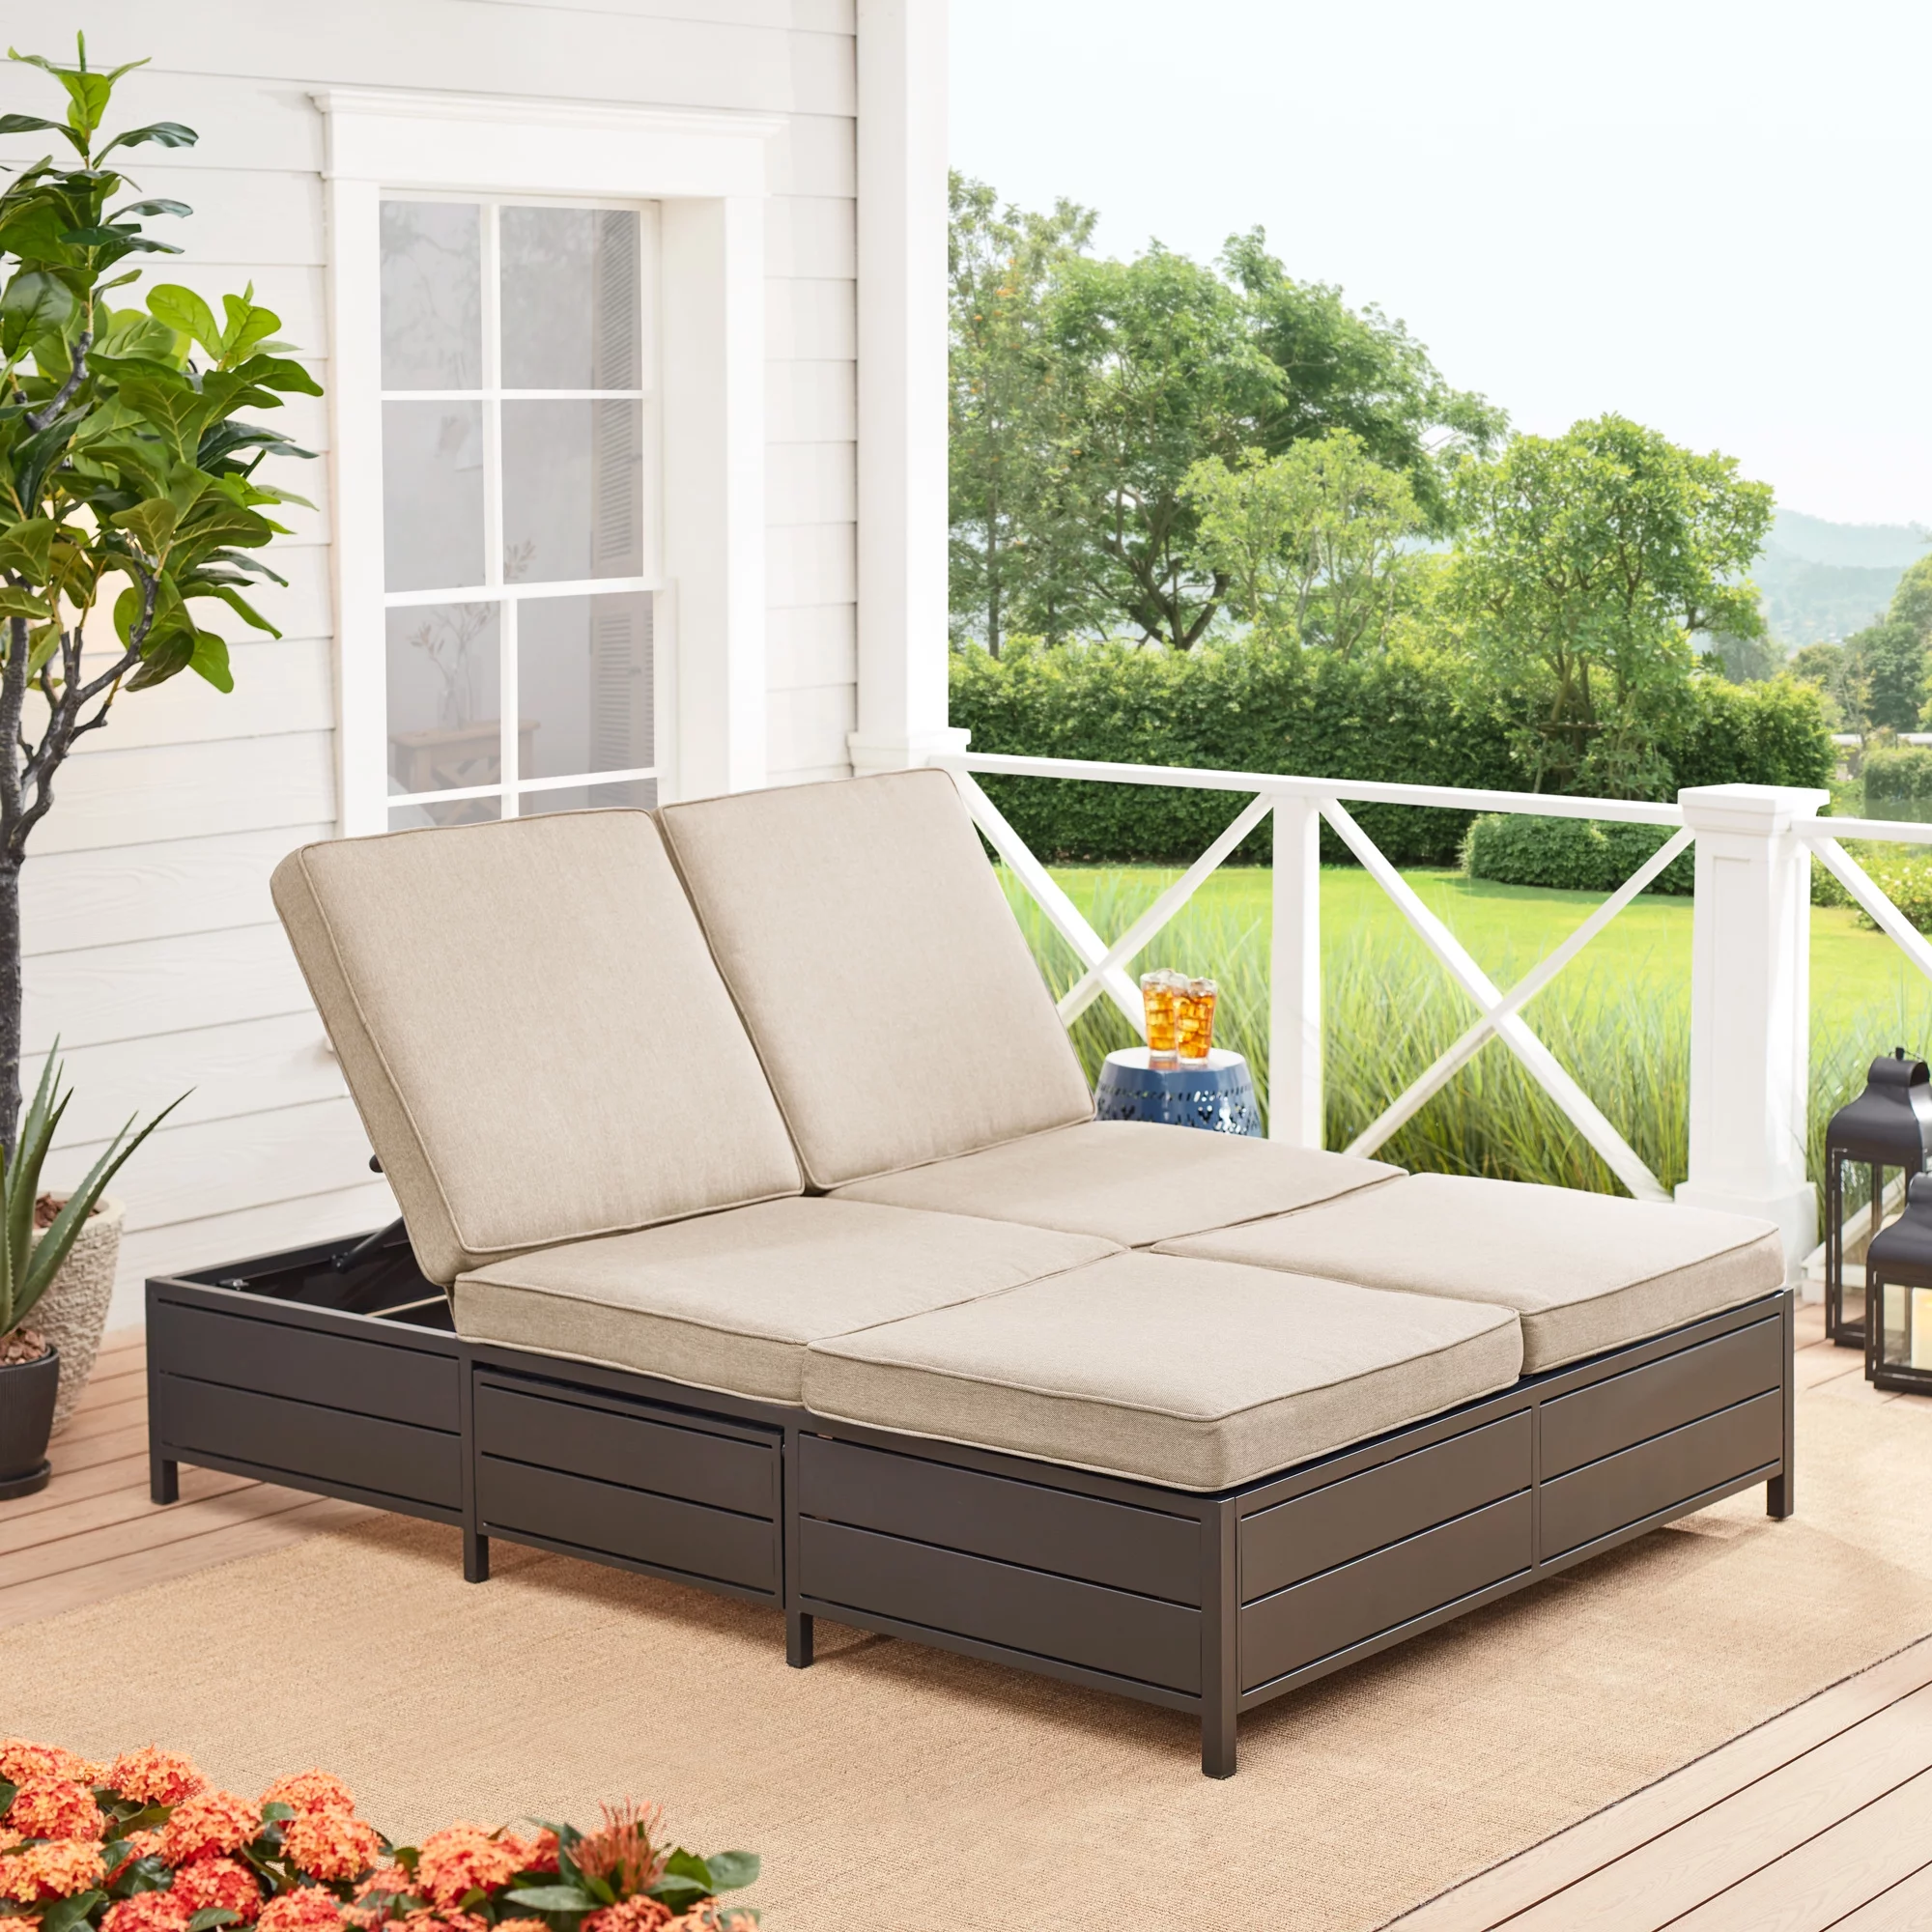 Mainstays Cushion Steel Outdoor Chaise Lounge - Tan/Black